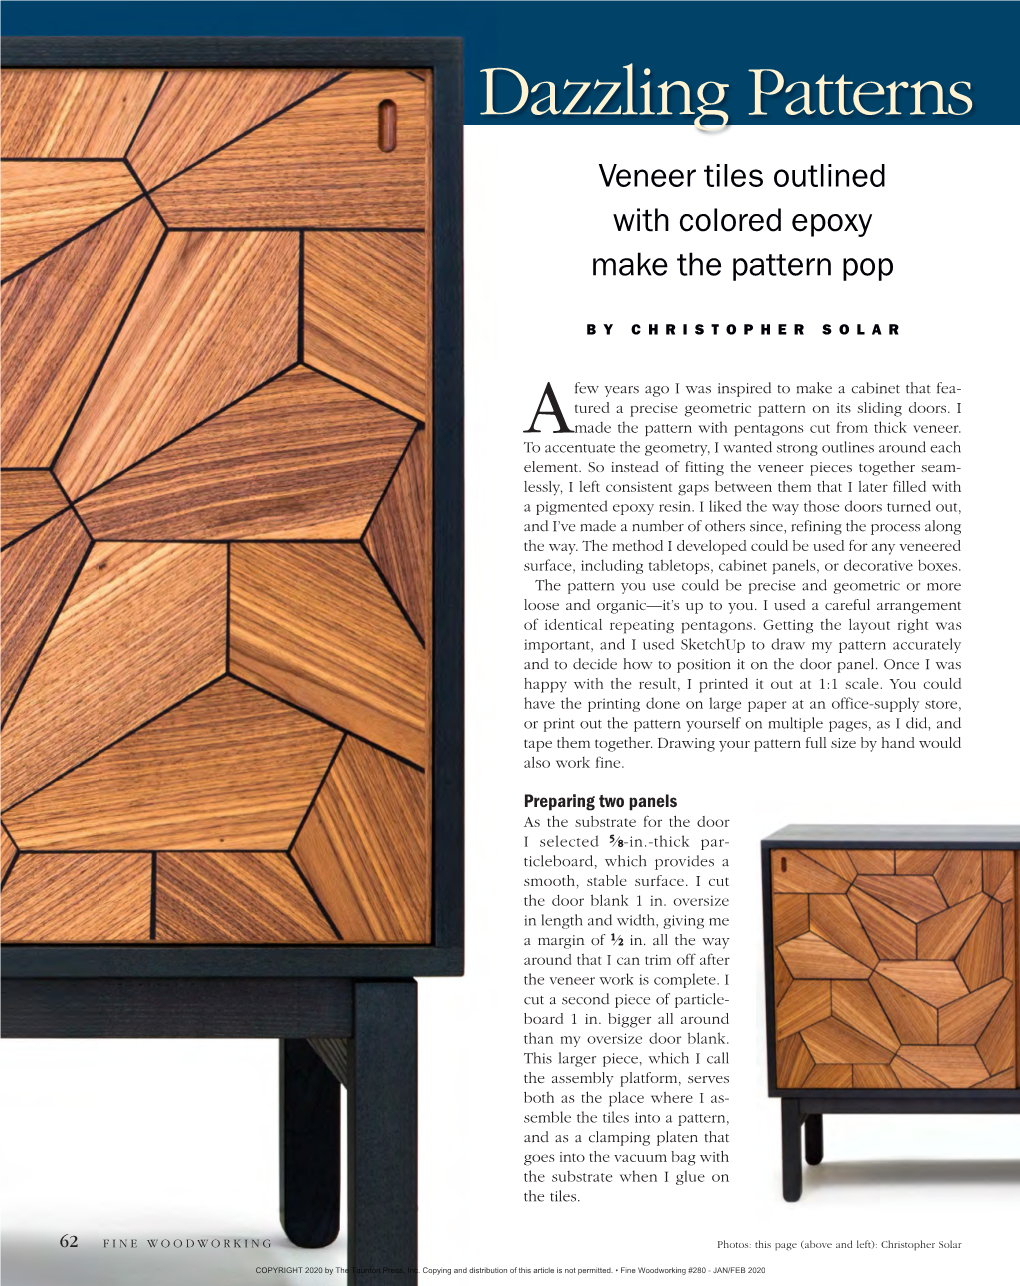 Dazzling Patterns in Parquetry Veneer Tiles Outlined with Colored Epoxy Make the Pattern Pop